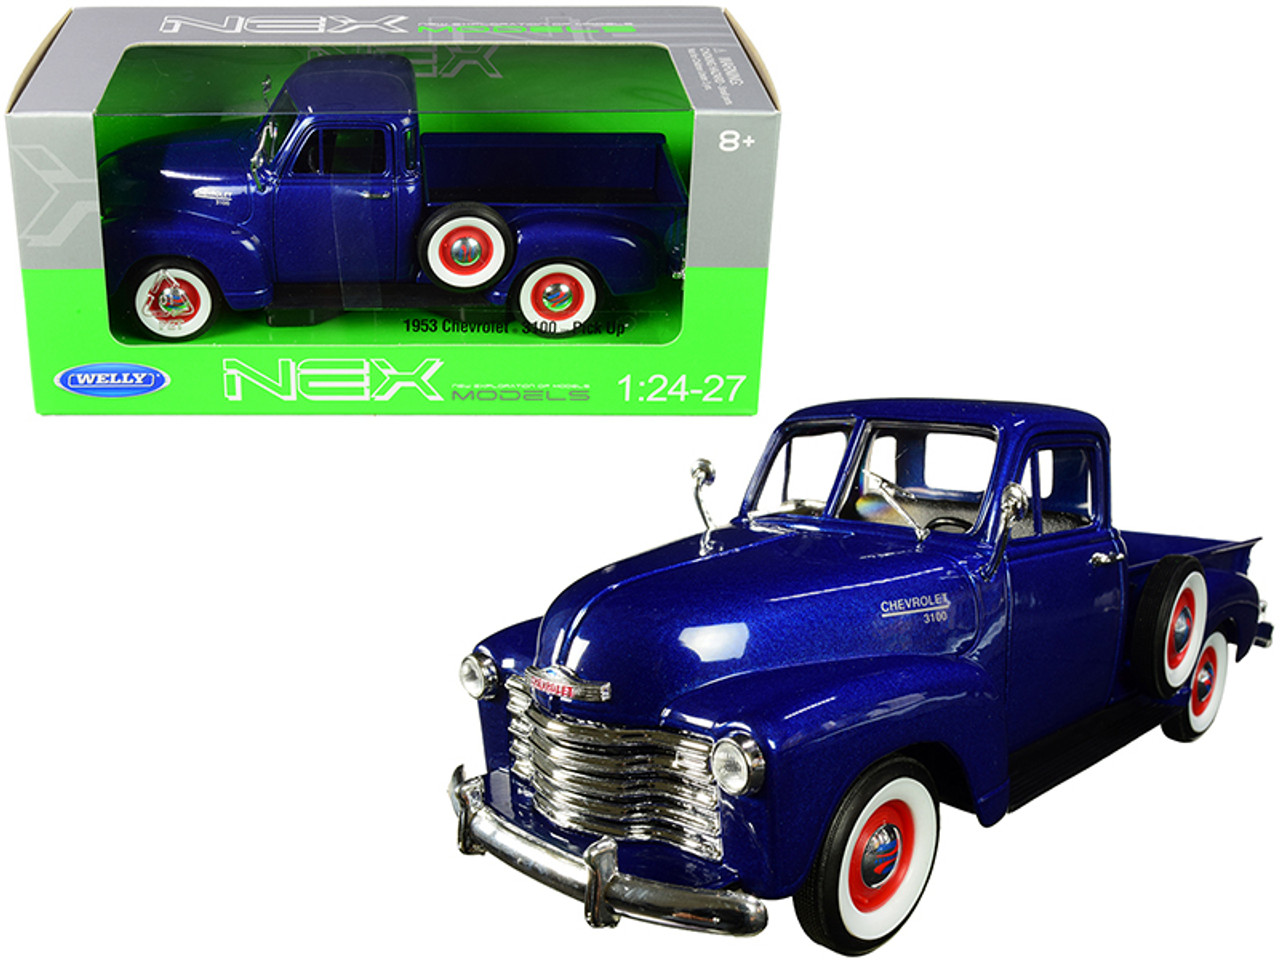 1953 Chevrolet 3100 Pickup Truck Blue 1/24-1/27 Diecast Model Car by Welly